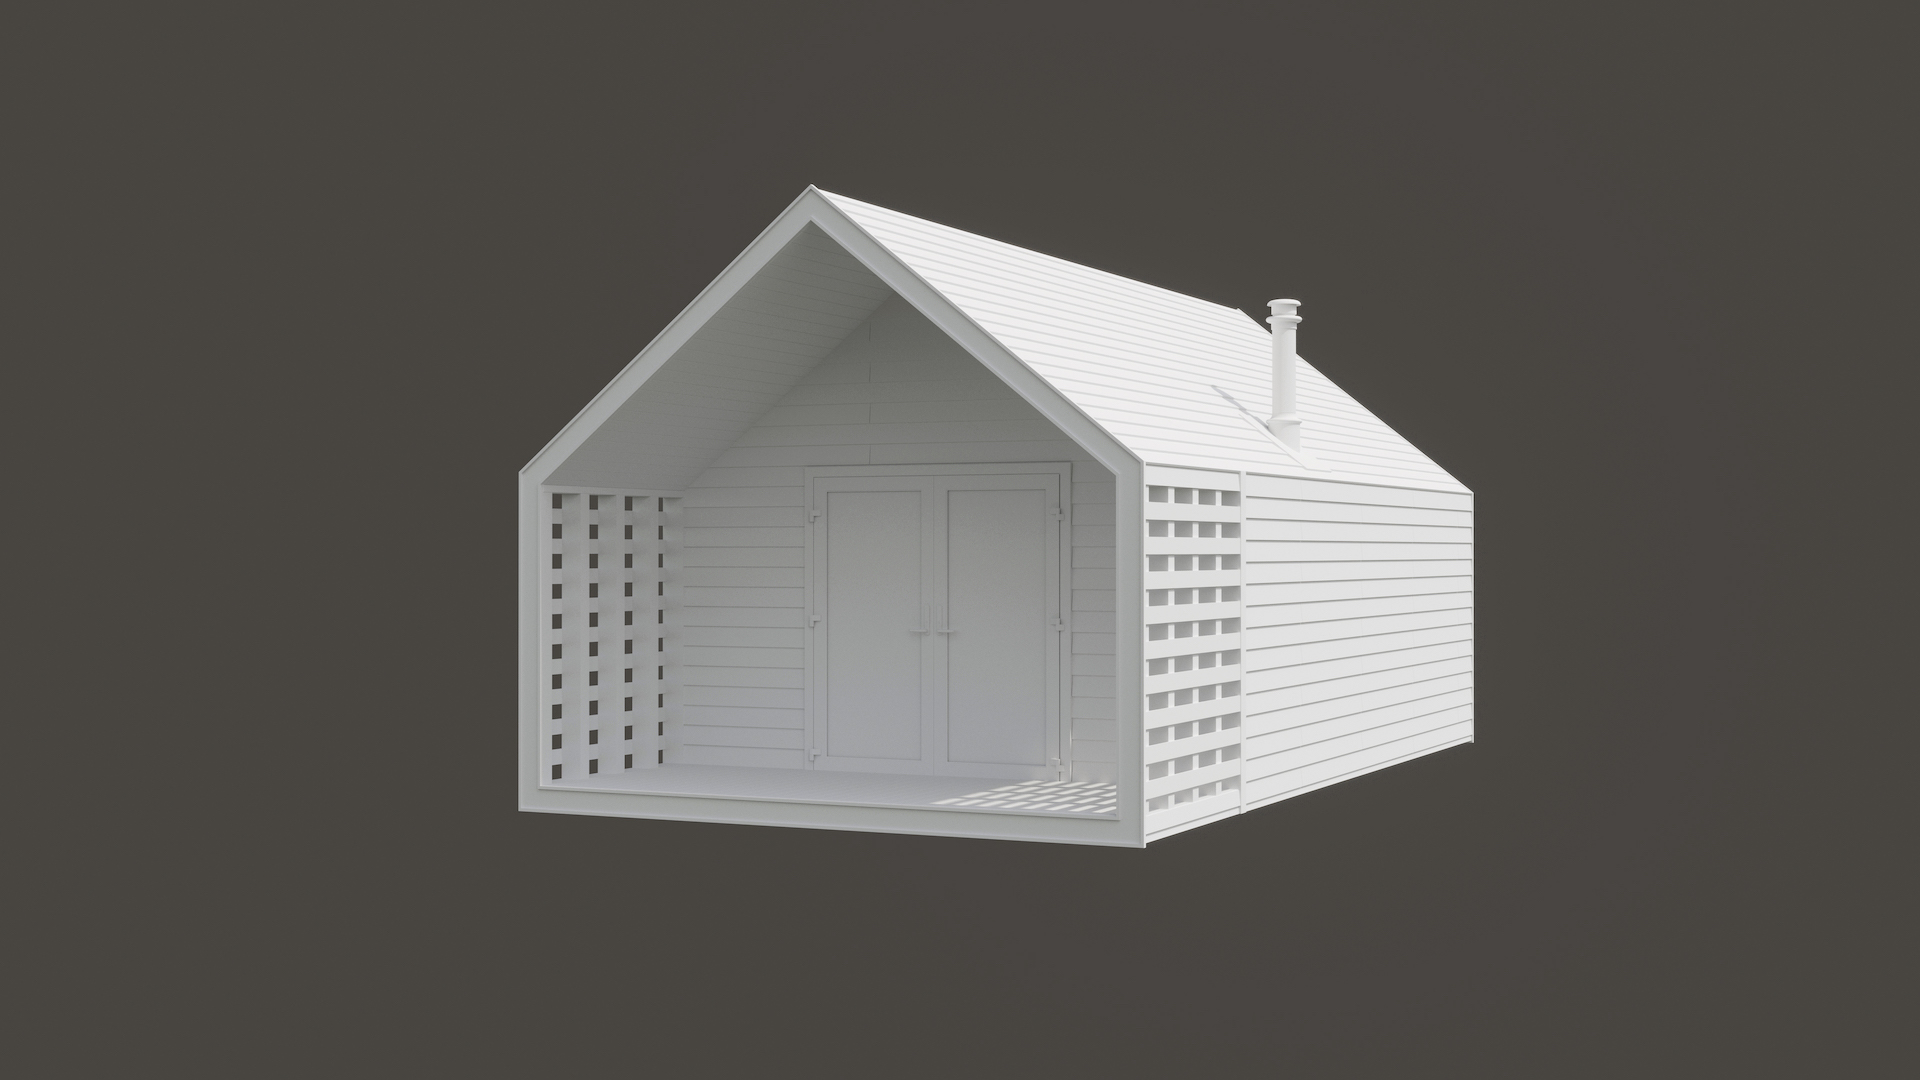 A CG Model of a House Made by a Professional 3D Artist